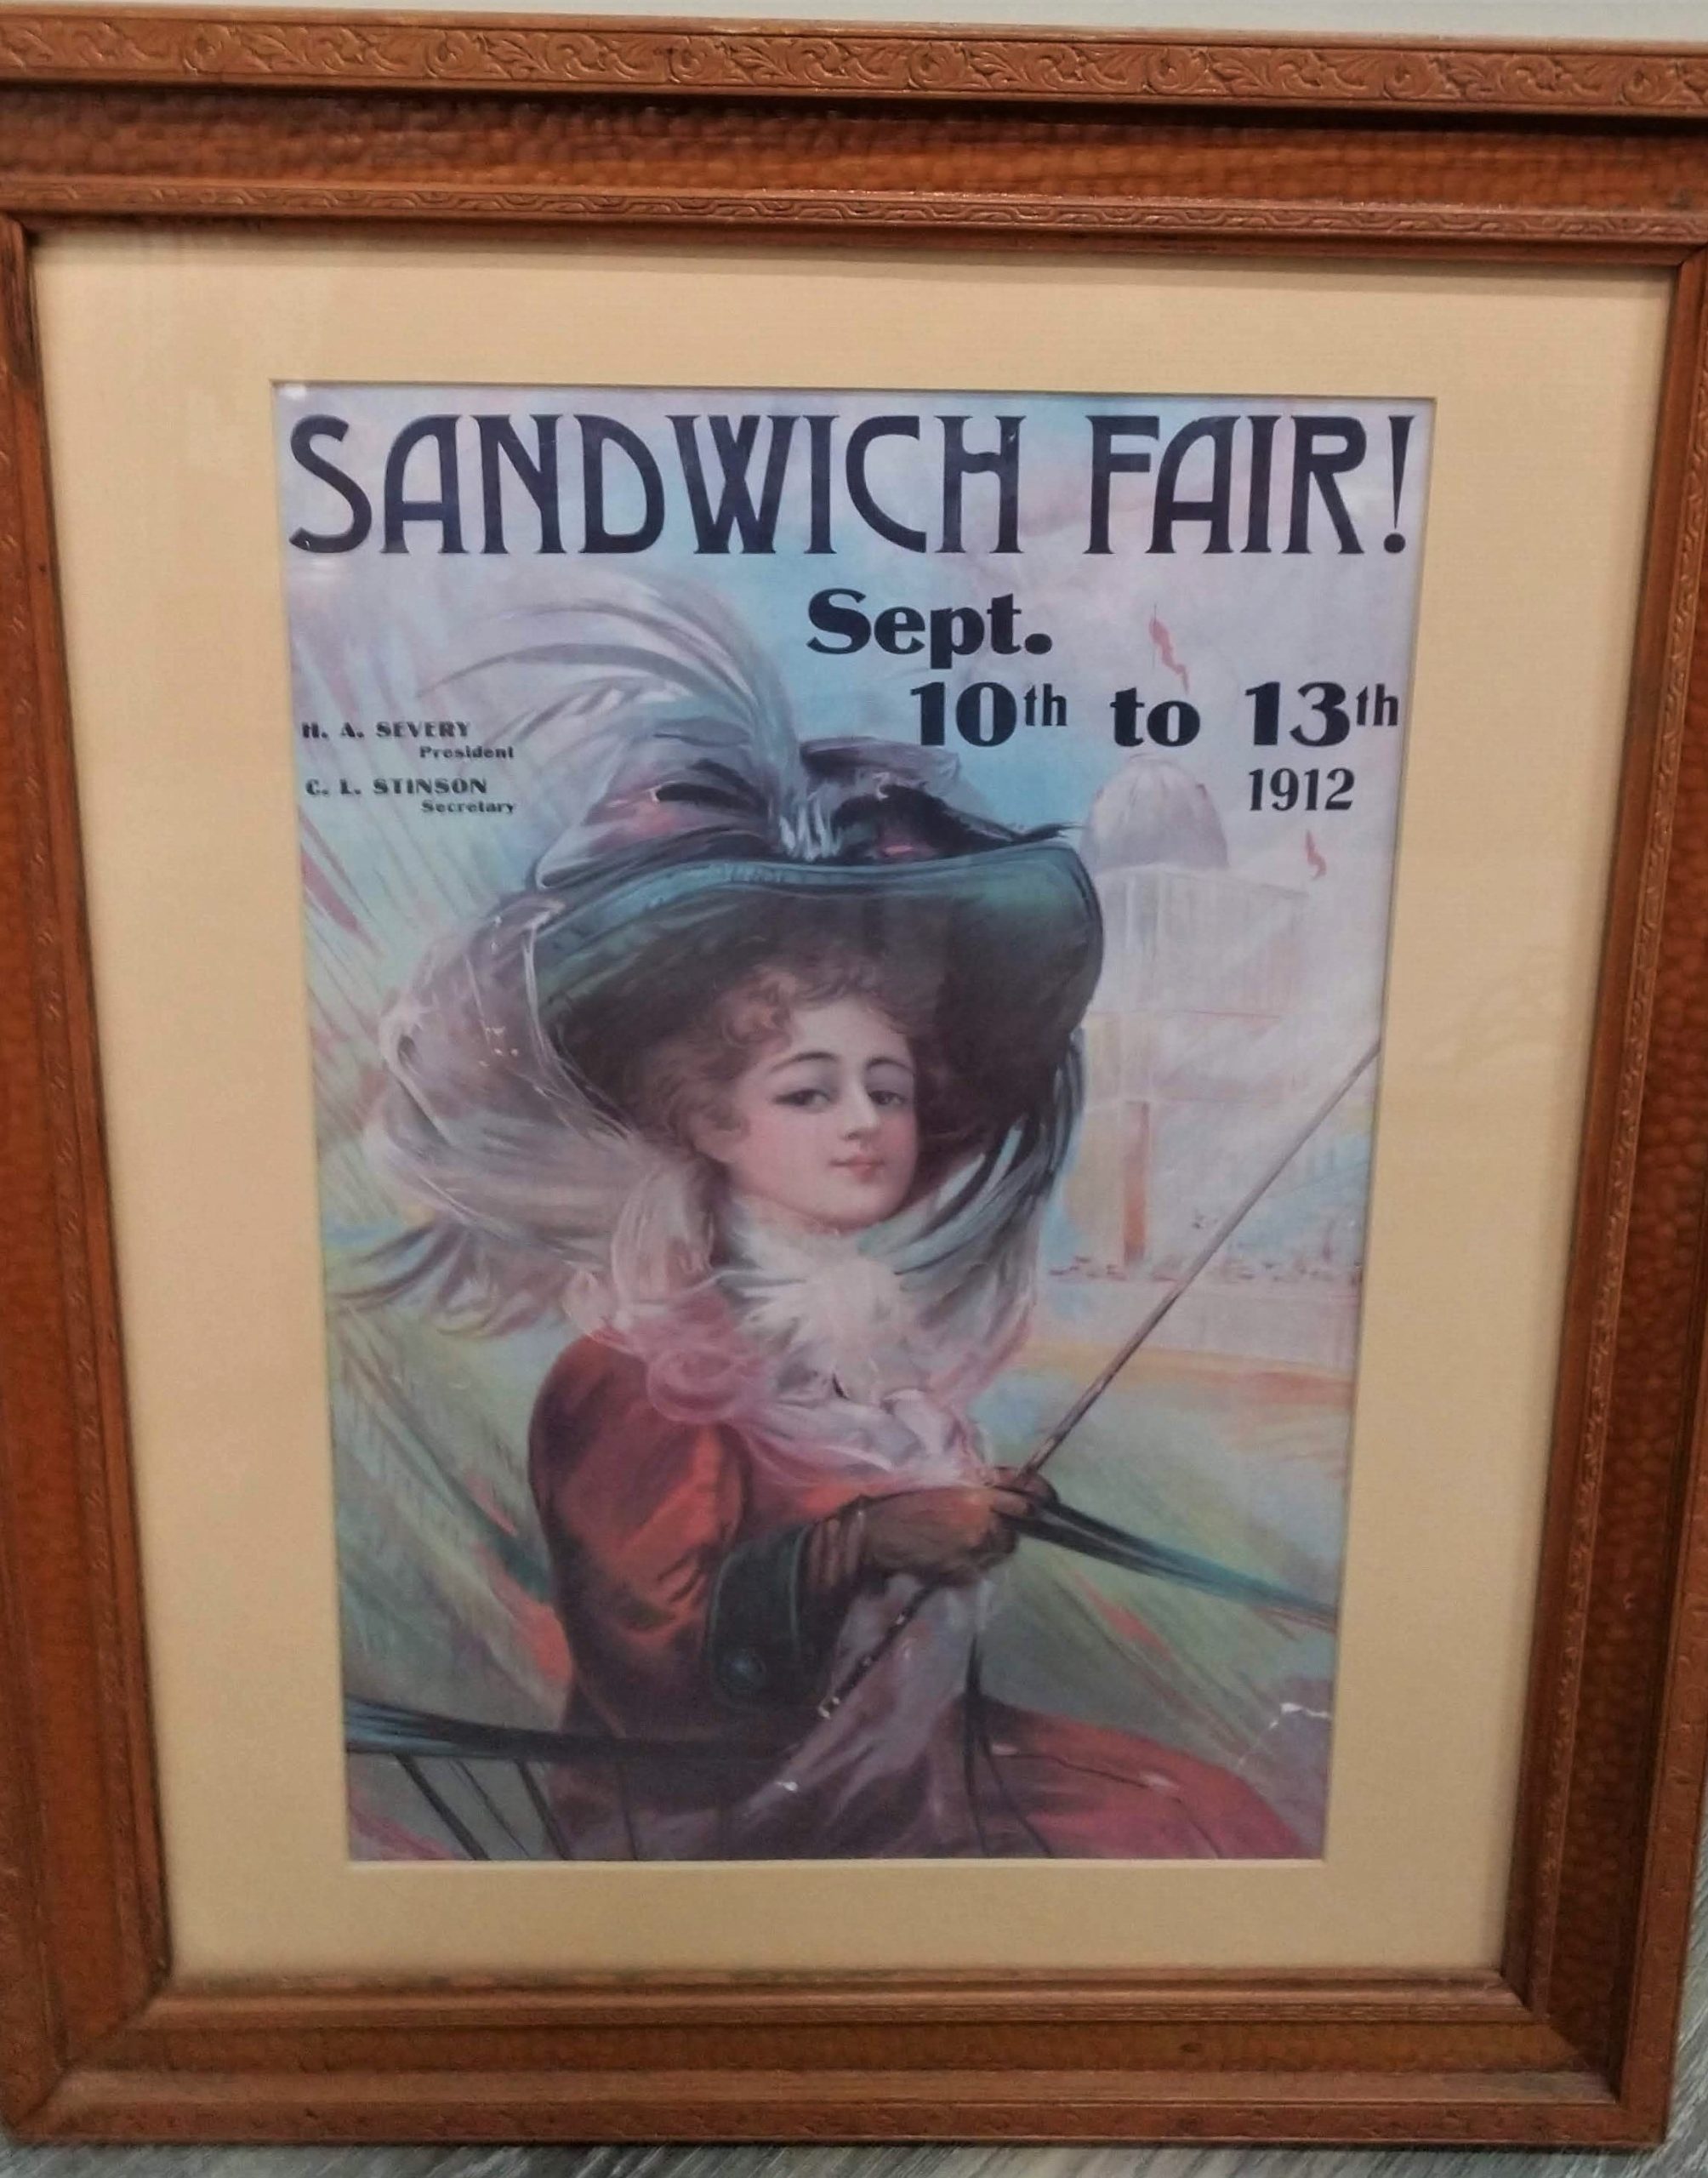 Photograph of poster advertising the 1912 Sandwich Fair.